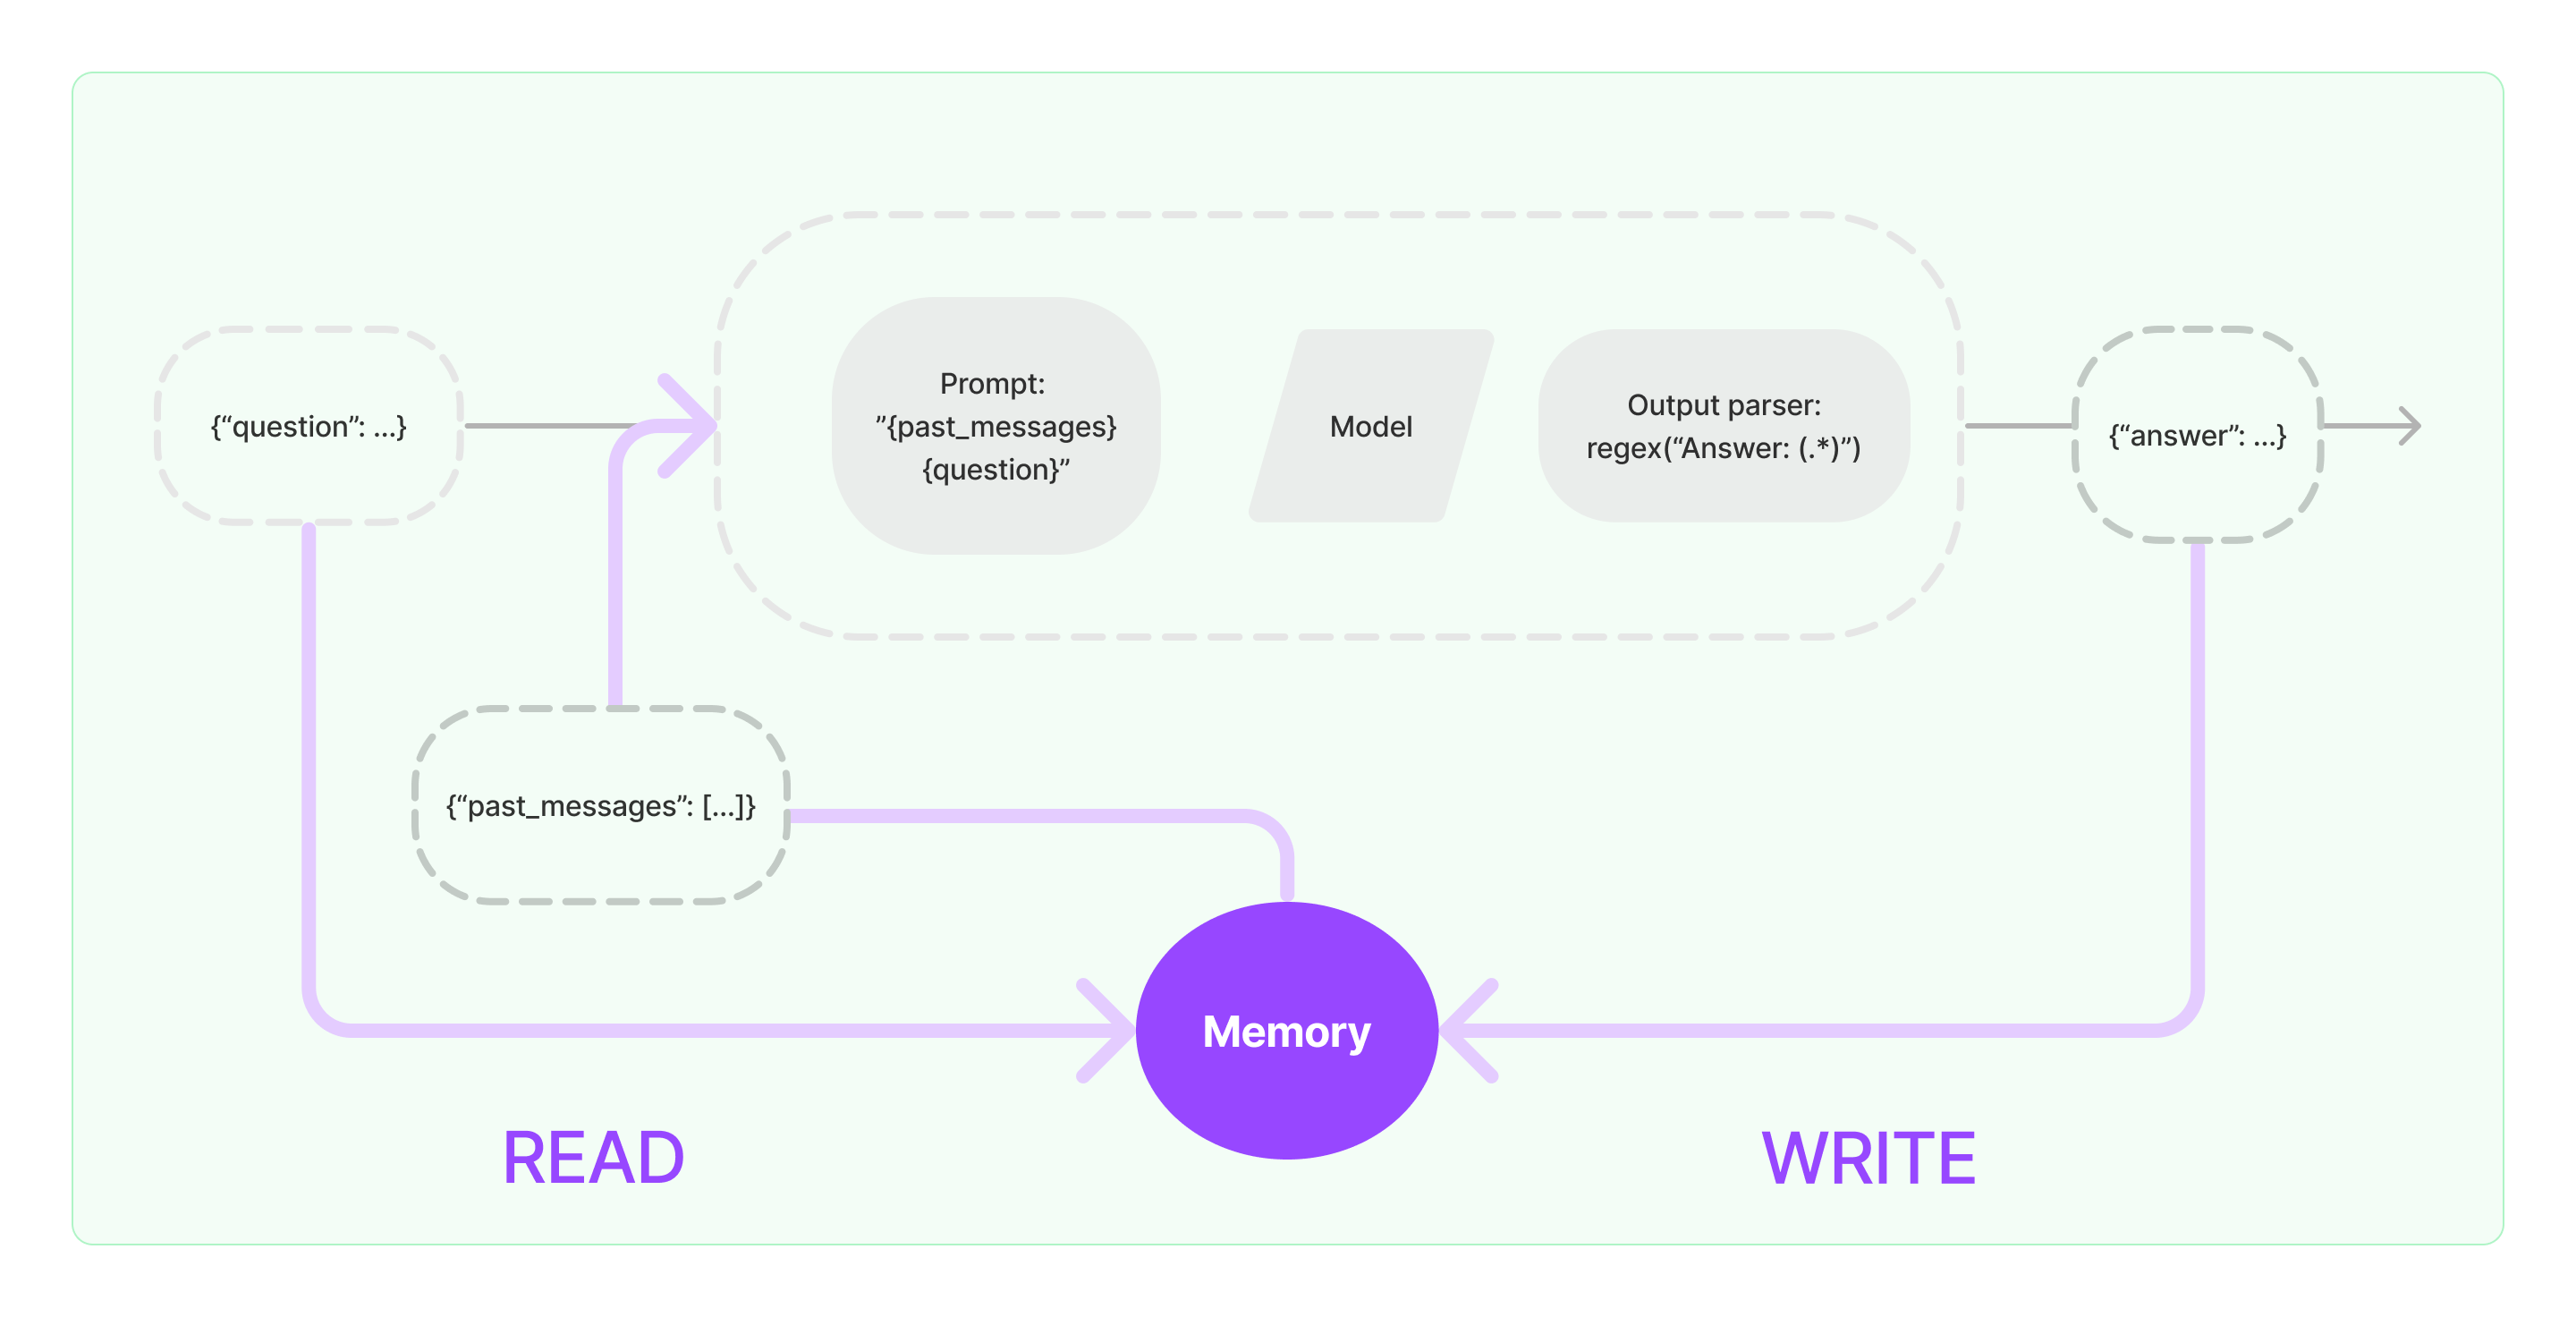 Diagram illustrating the READ and WRITE operations of a memory system in a conversational interface.